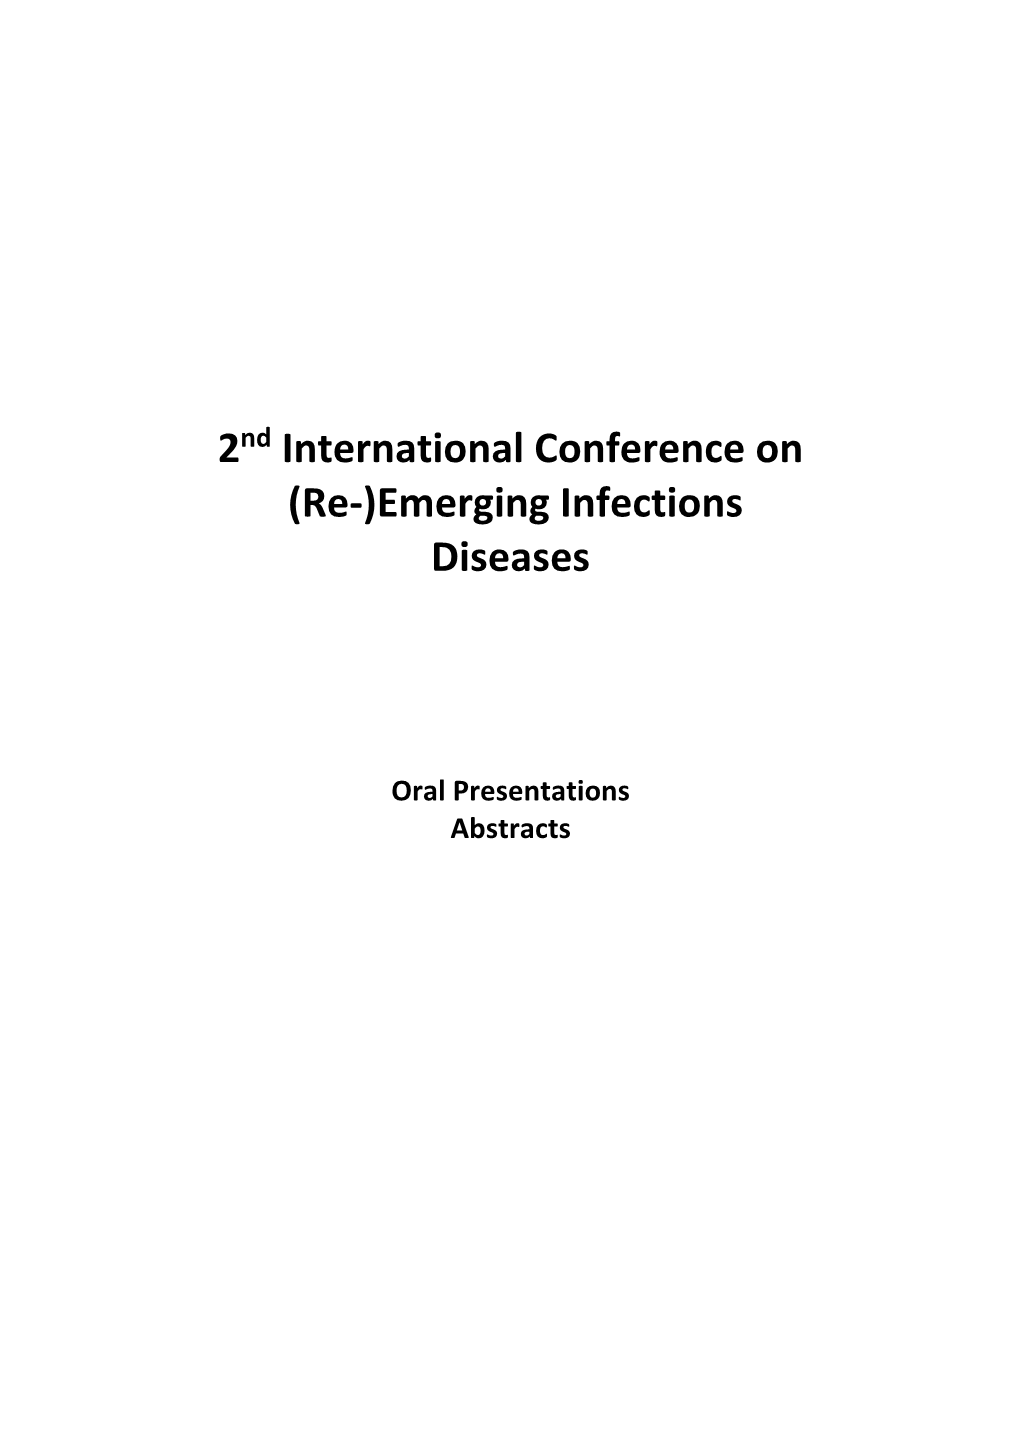 2Nd International Conference on (Re-)Emerging Infections Diseases